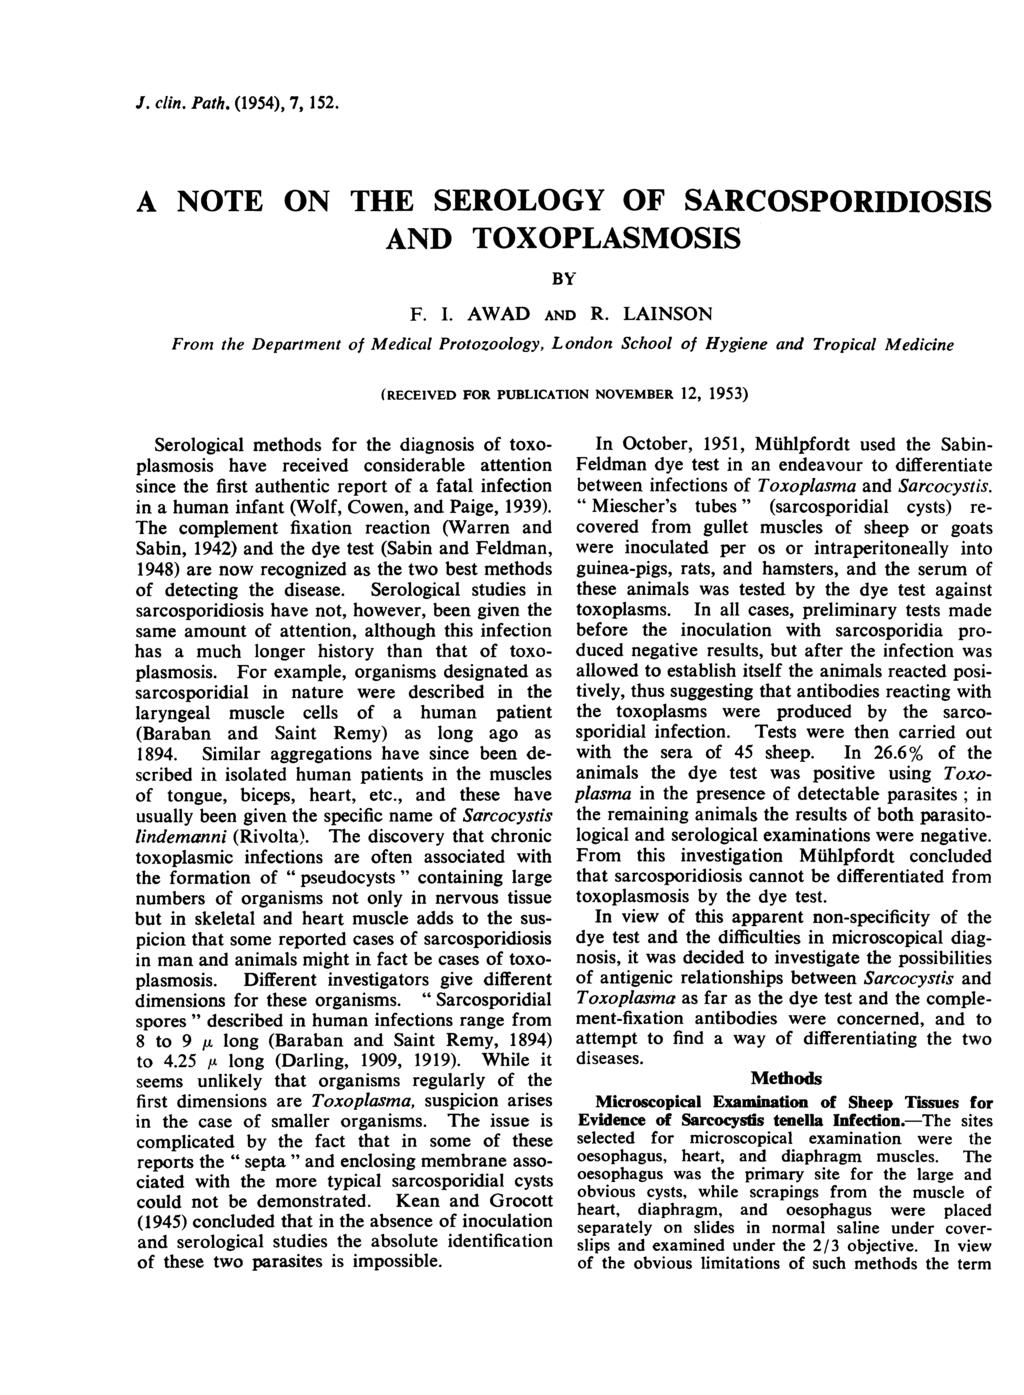 J. clin. Path. (1954), 7, 152. A NOTE ON THE SEROLOGY OF SARCOSPORIDIOSIS BY F. I. AWAD AND R.